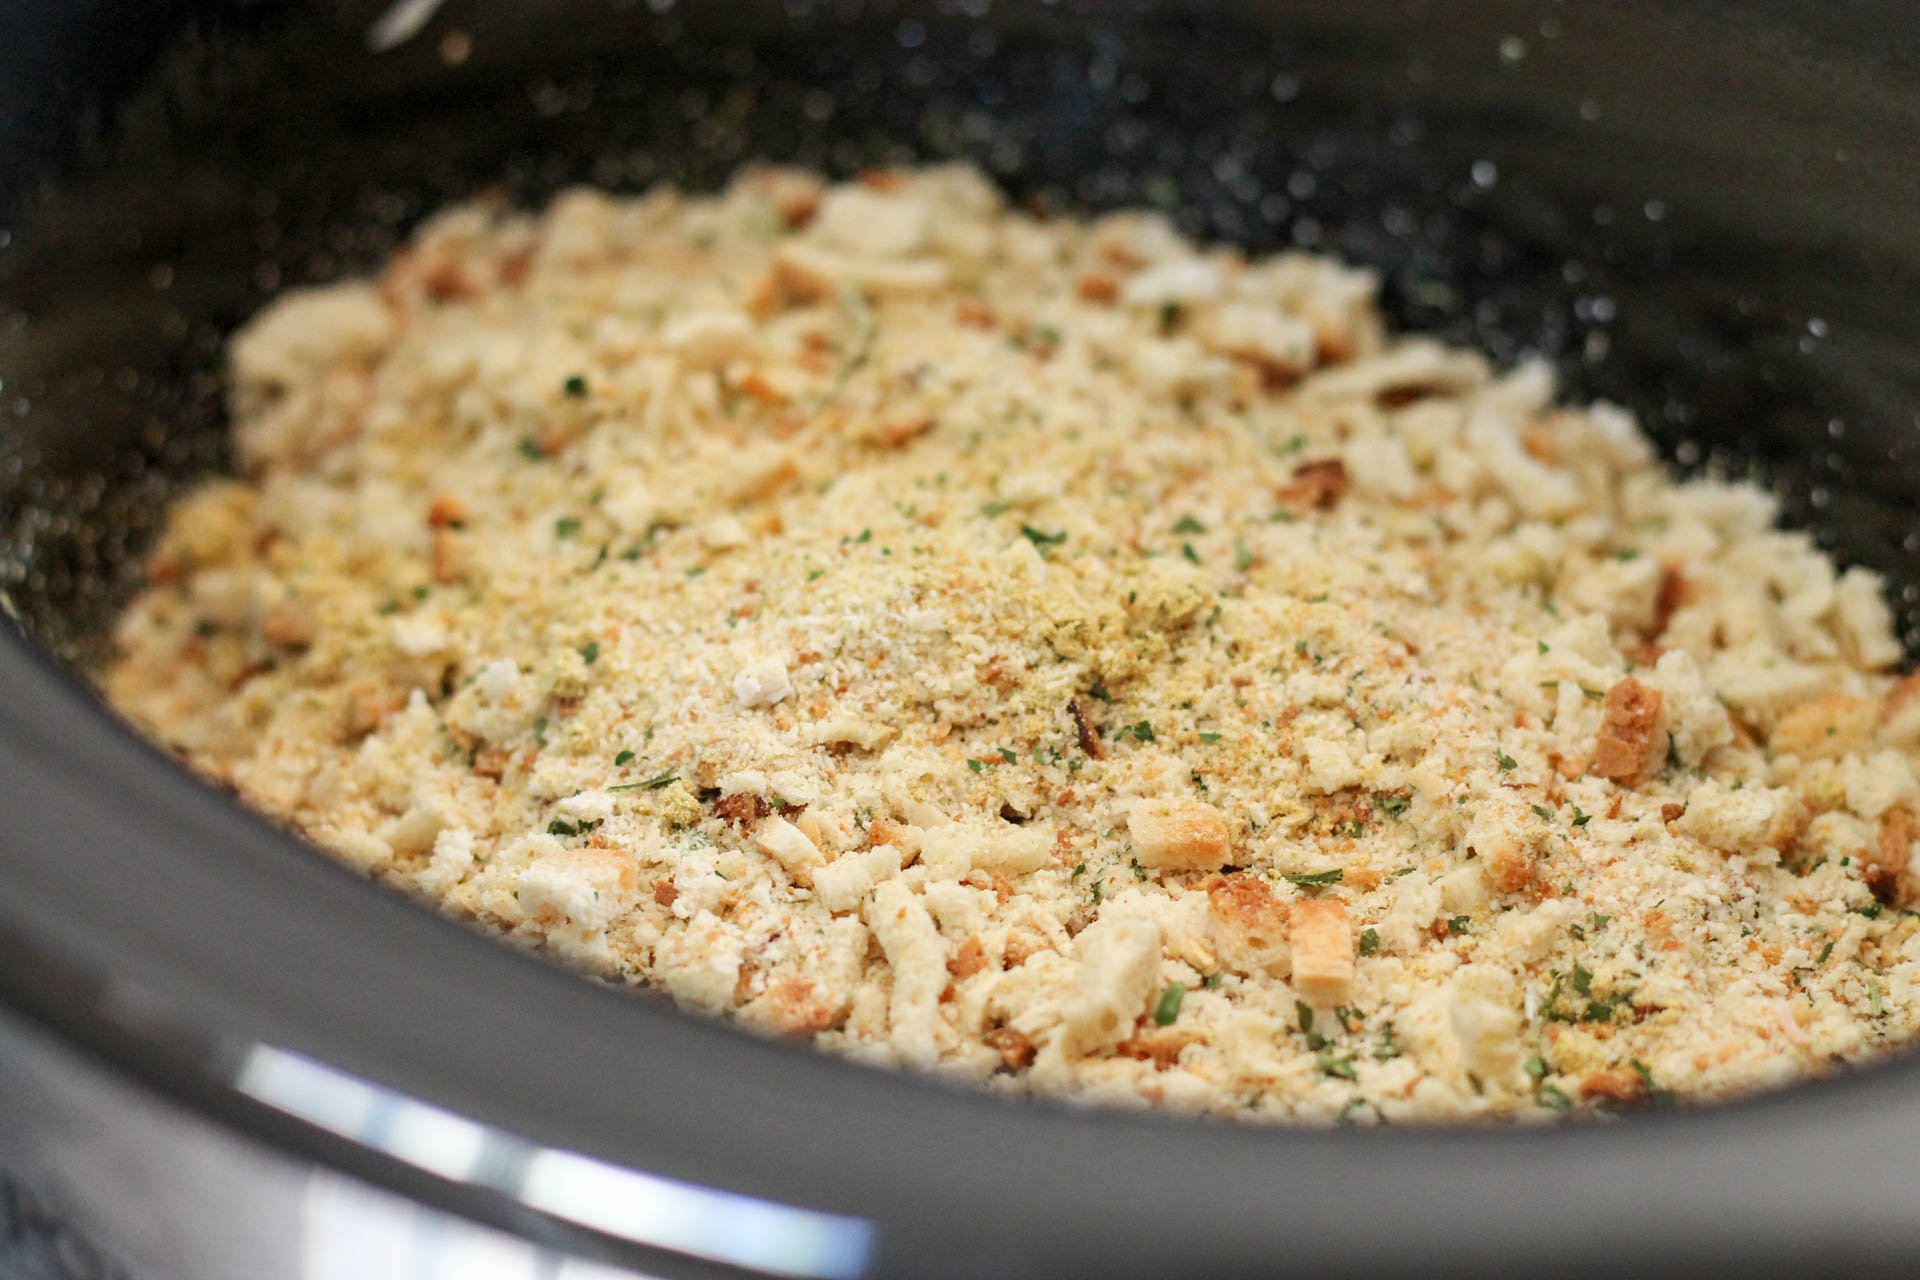 Stuffing mix on top of raw chicken and cheese in the slow cooker